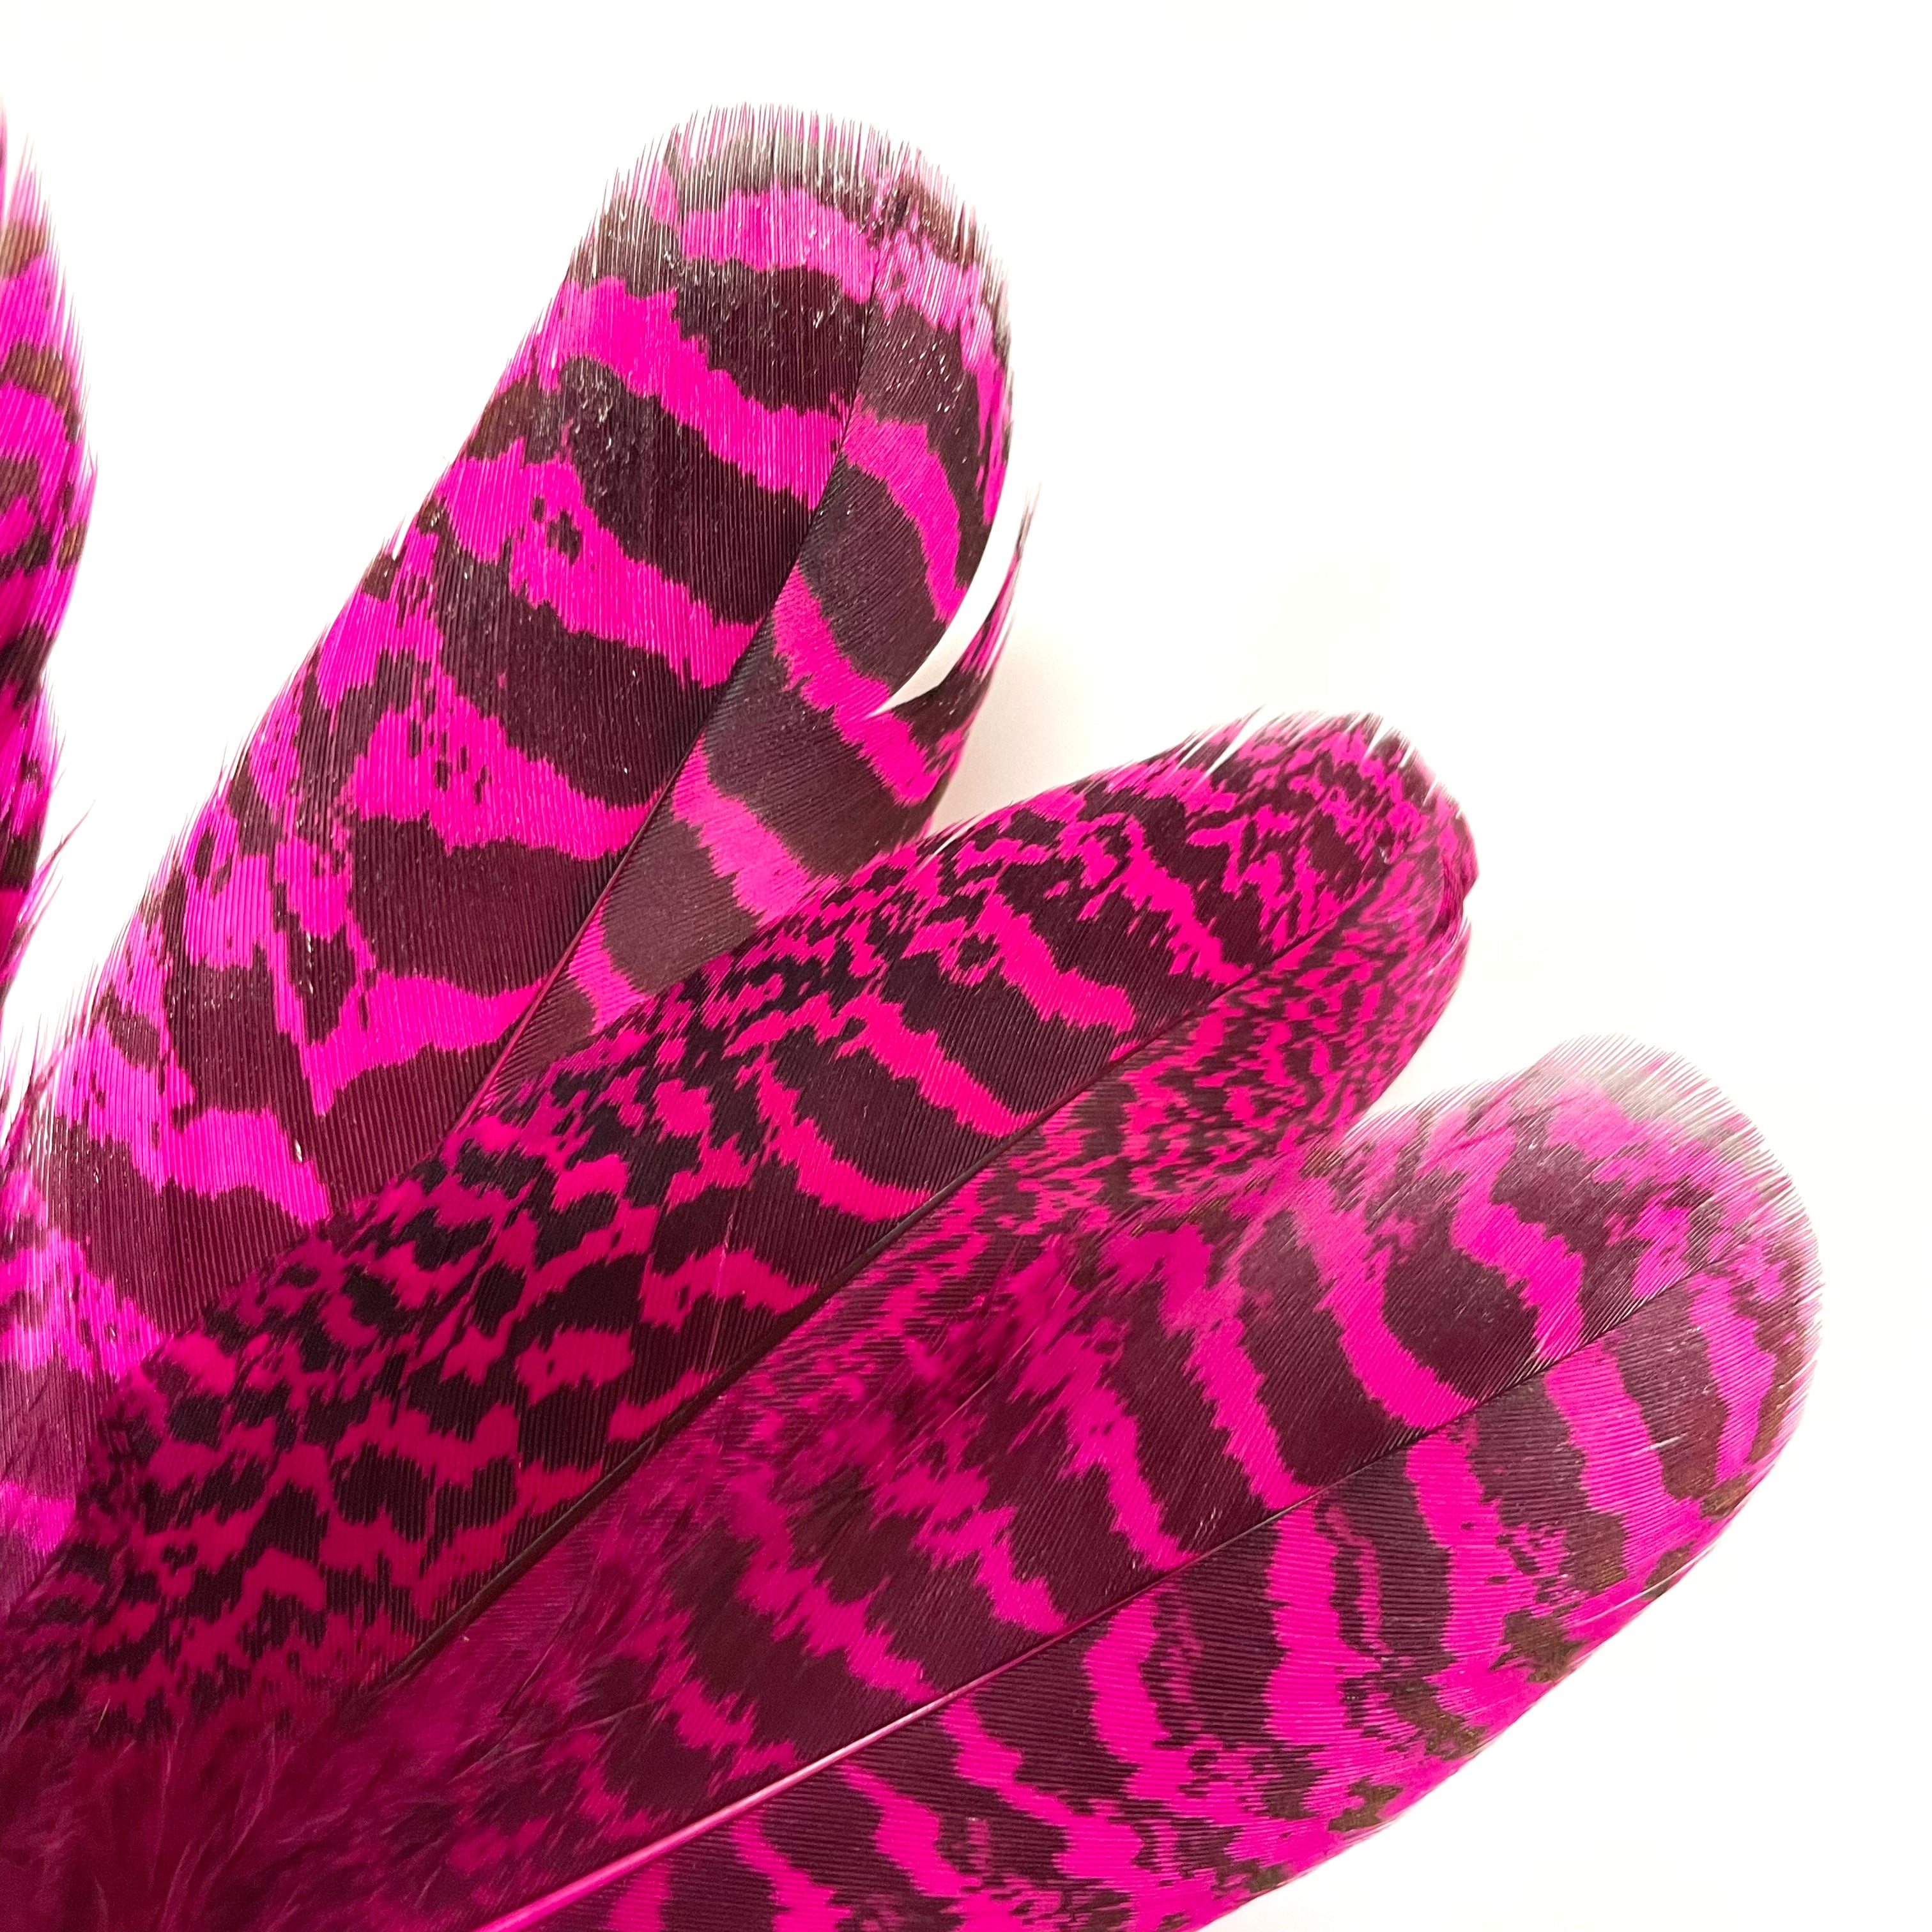 Peacock Mottled Wing Feather x 5pcs - Cerise